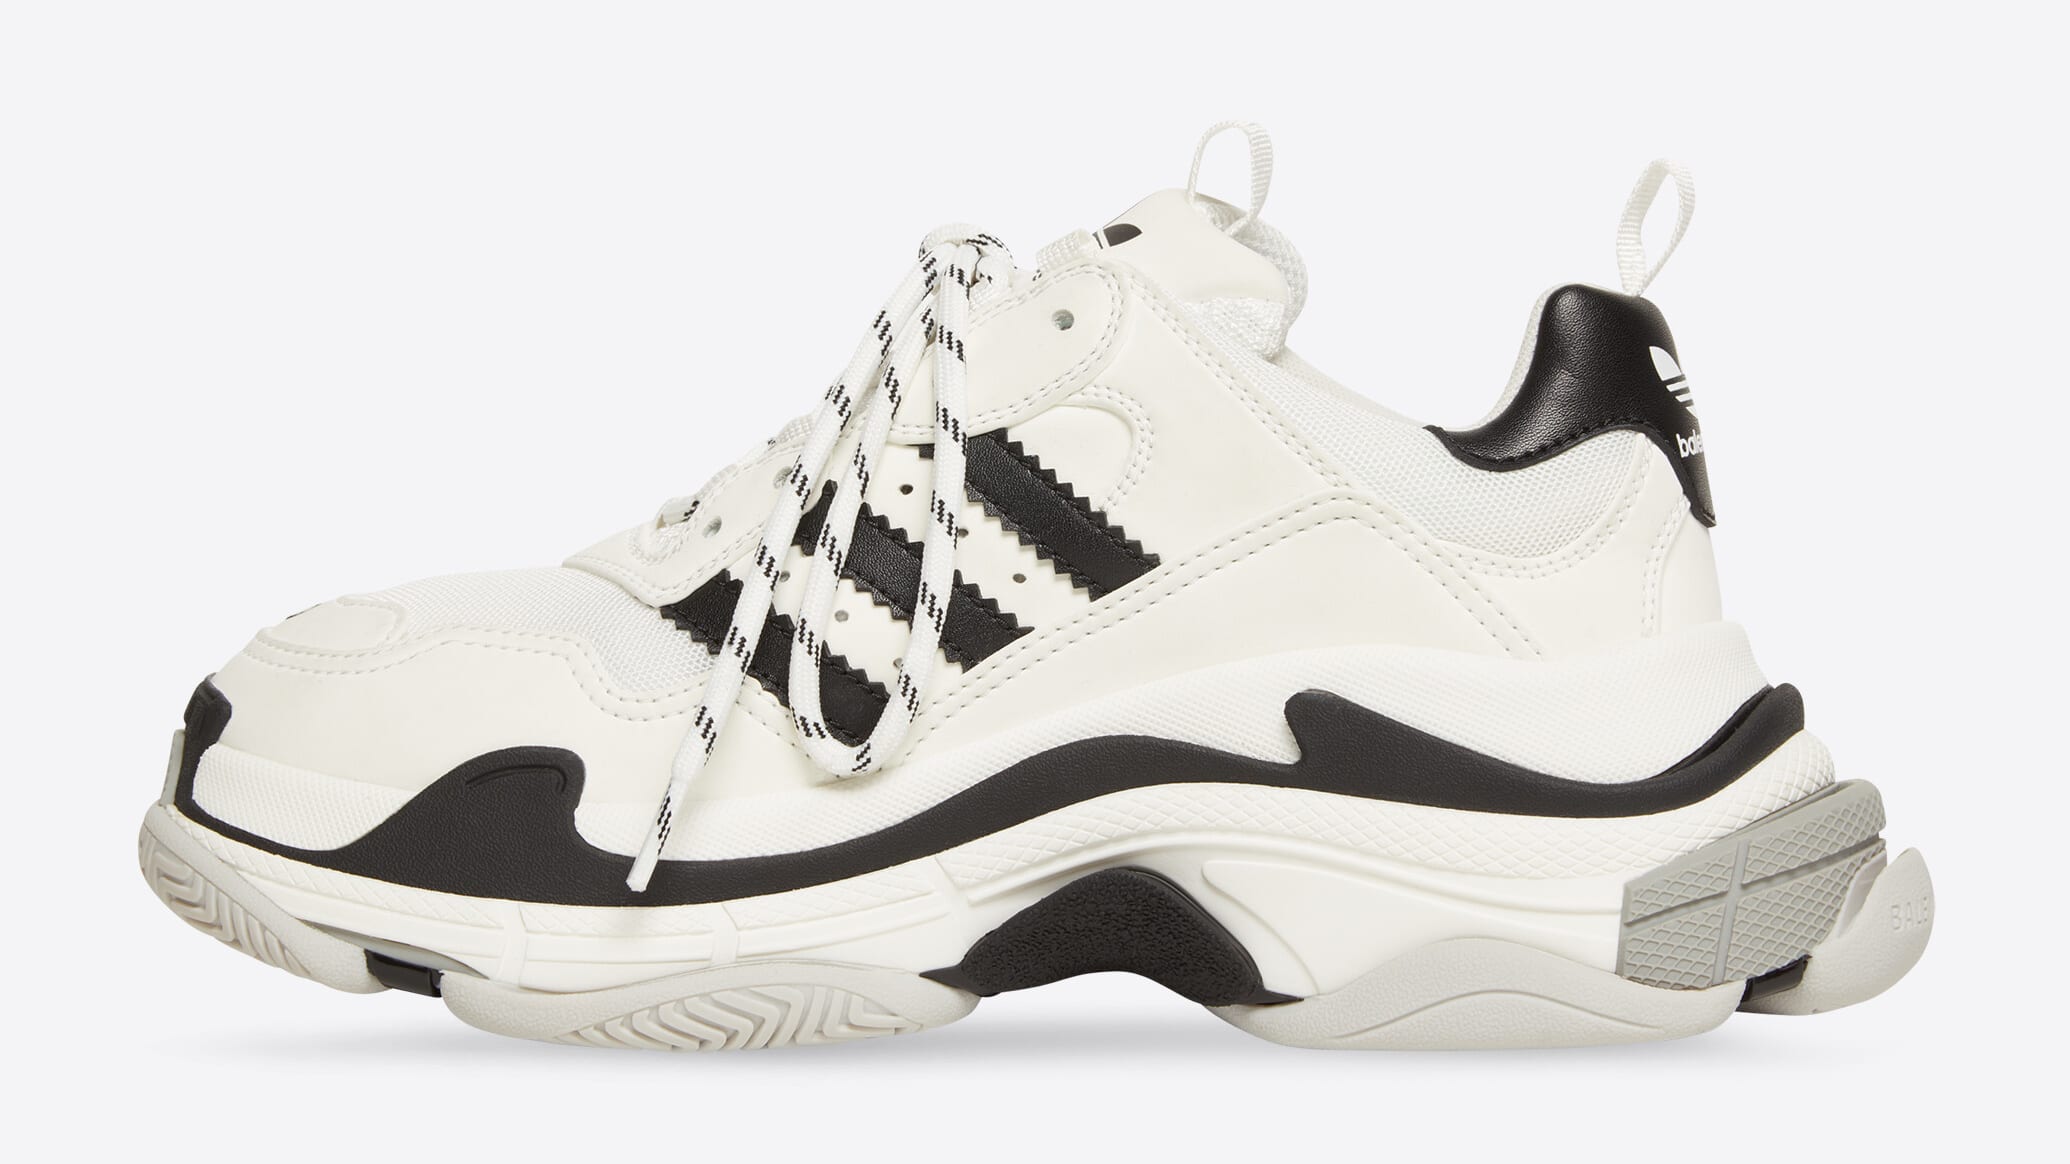 The Week's Best Sneakers Feature An Adidas Balenciaga Collab